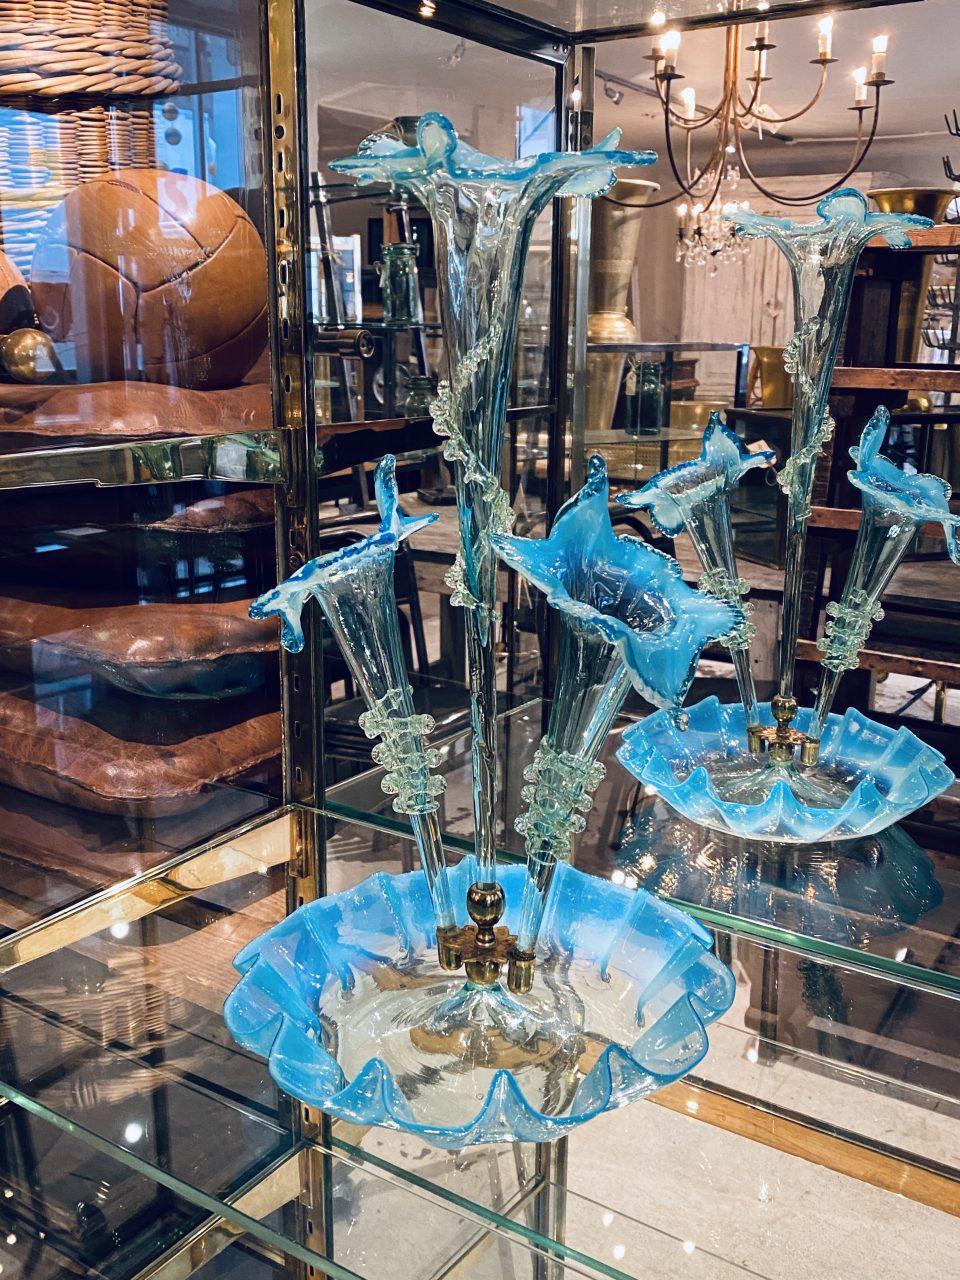 Seldom seen and spectacular vintage Italian Murano glass centrepiece set with bowl and 3 vases, circa 1950s. The glass is both mouth-blown and handmade and very artfully made using transparent and turquoise coloured opaque glass with frilled